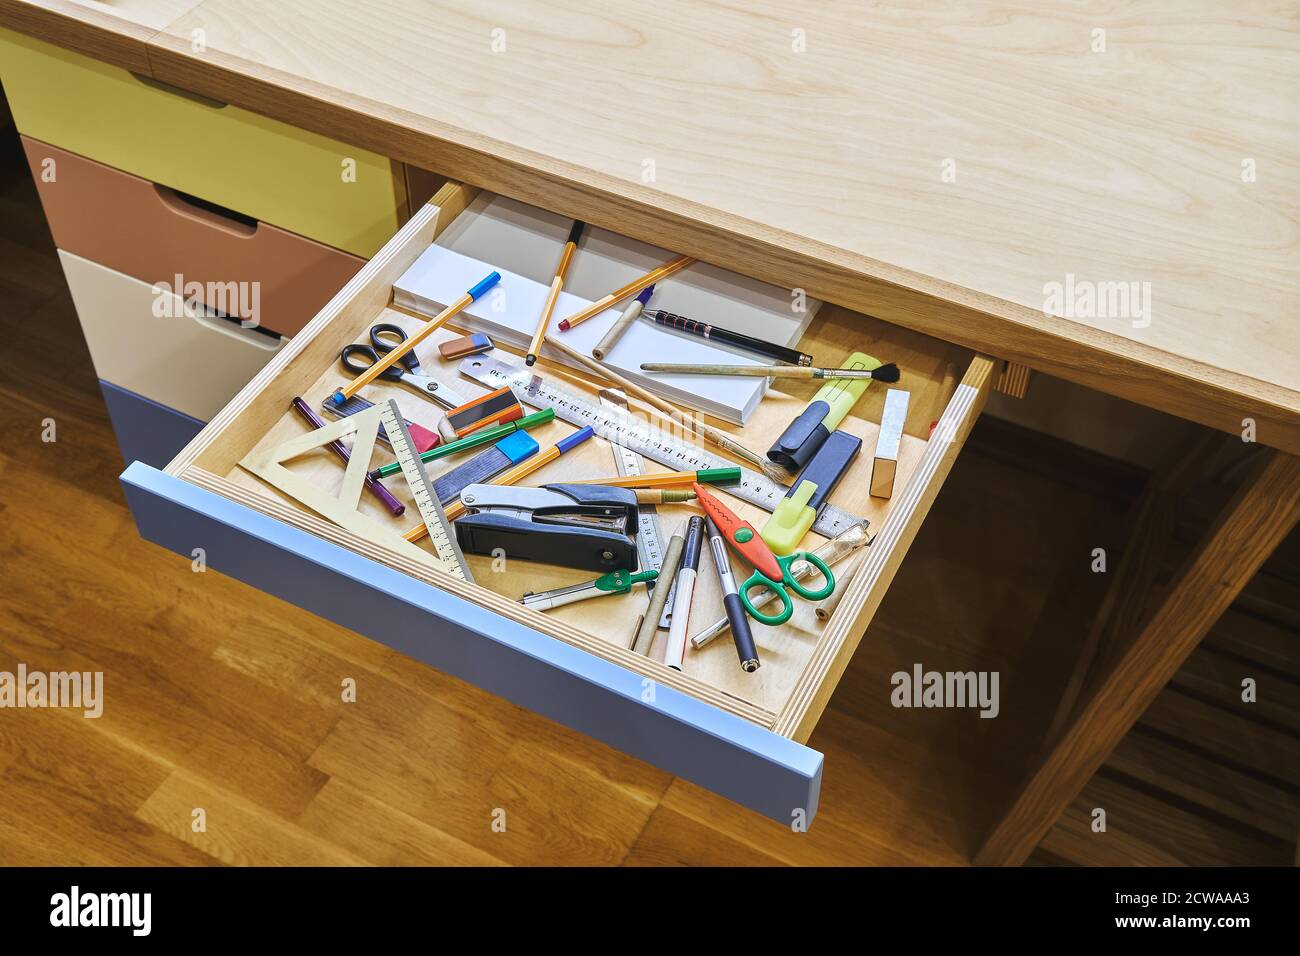 Open drawer of modern desk with unsorted stationery not ready for school studies Stock Photo